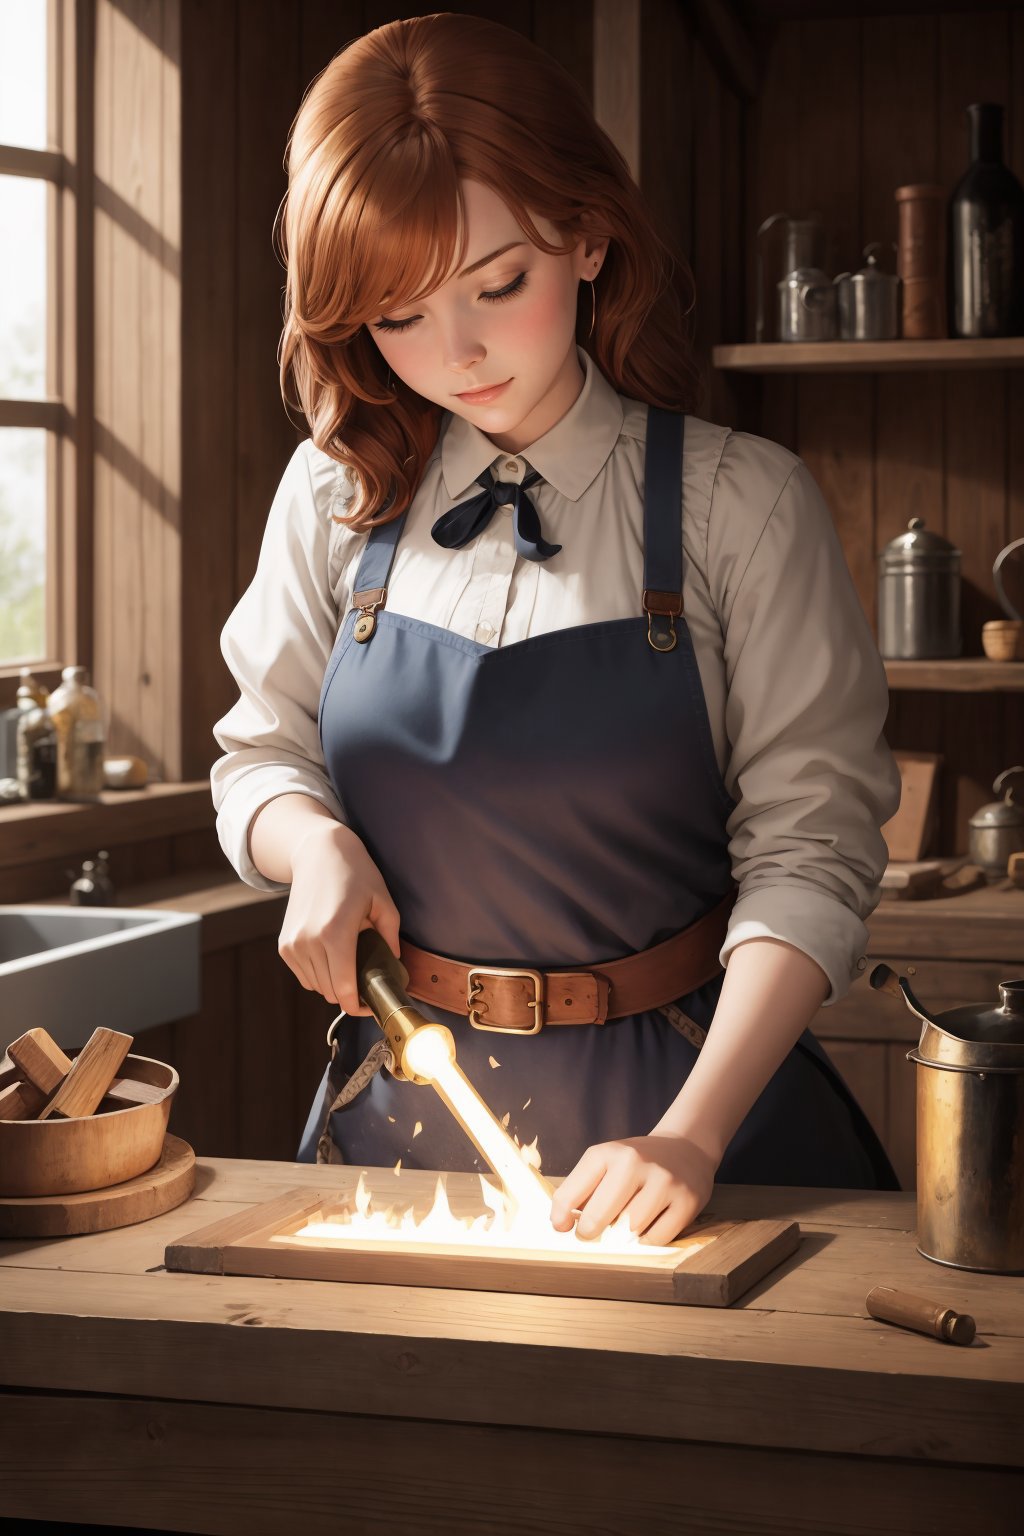 A woman with a blue apron is cutting a piece of wood with a knife.